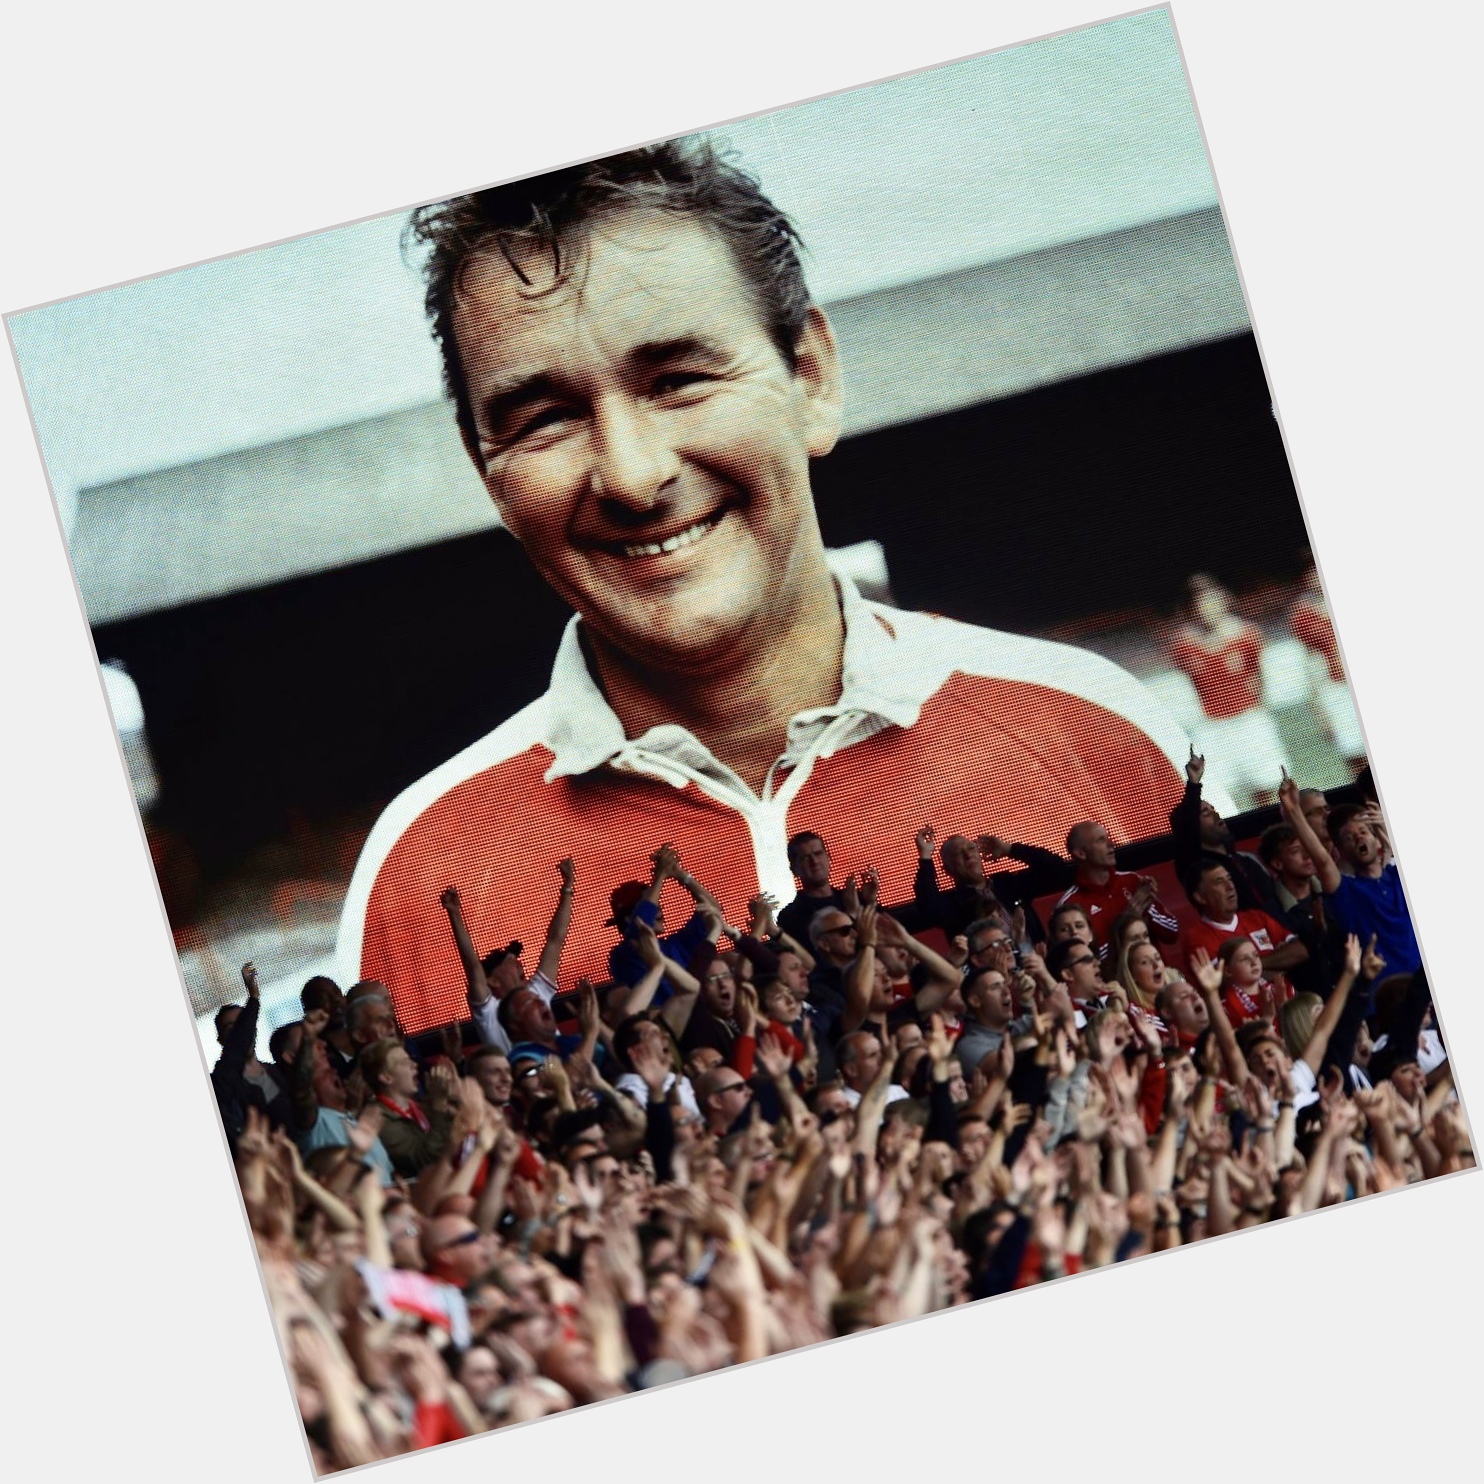 Happy Birthday to one of the greats, Brian Clough.  